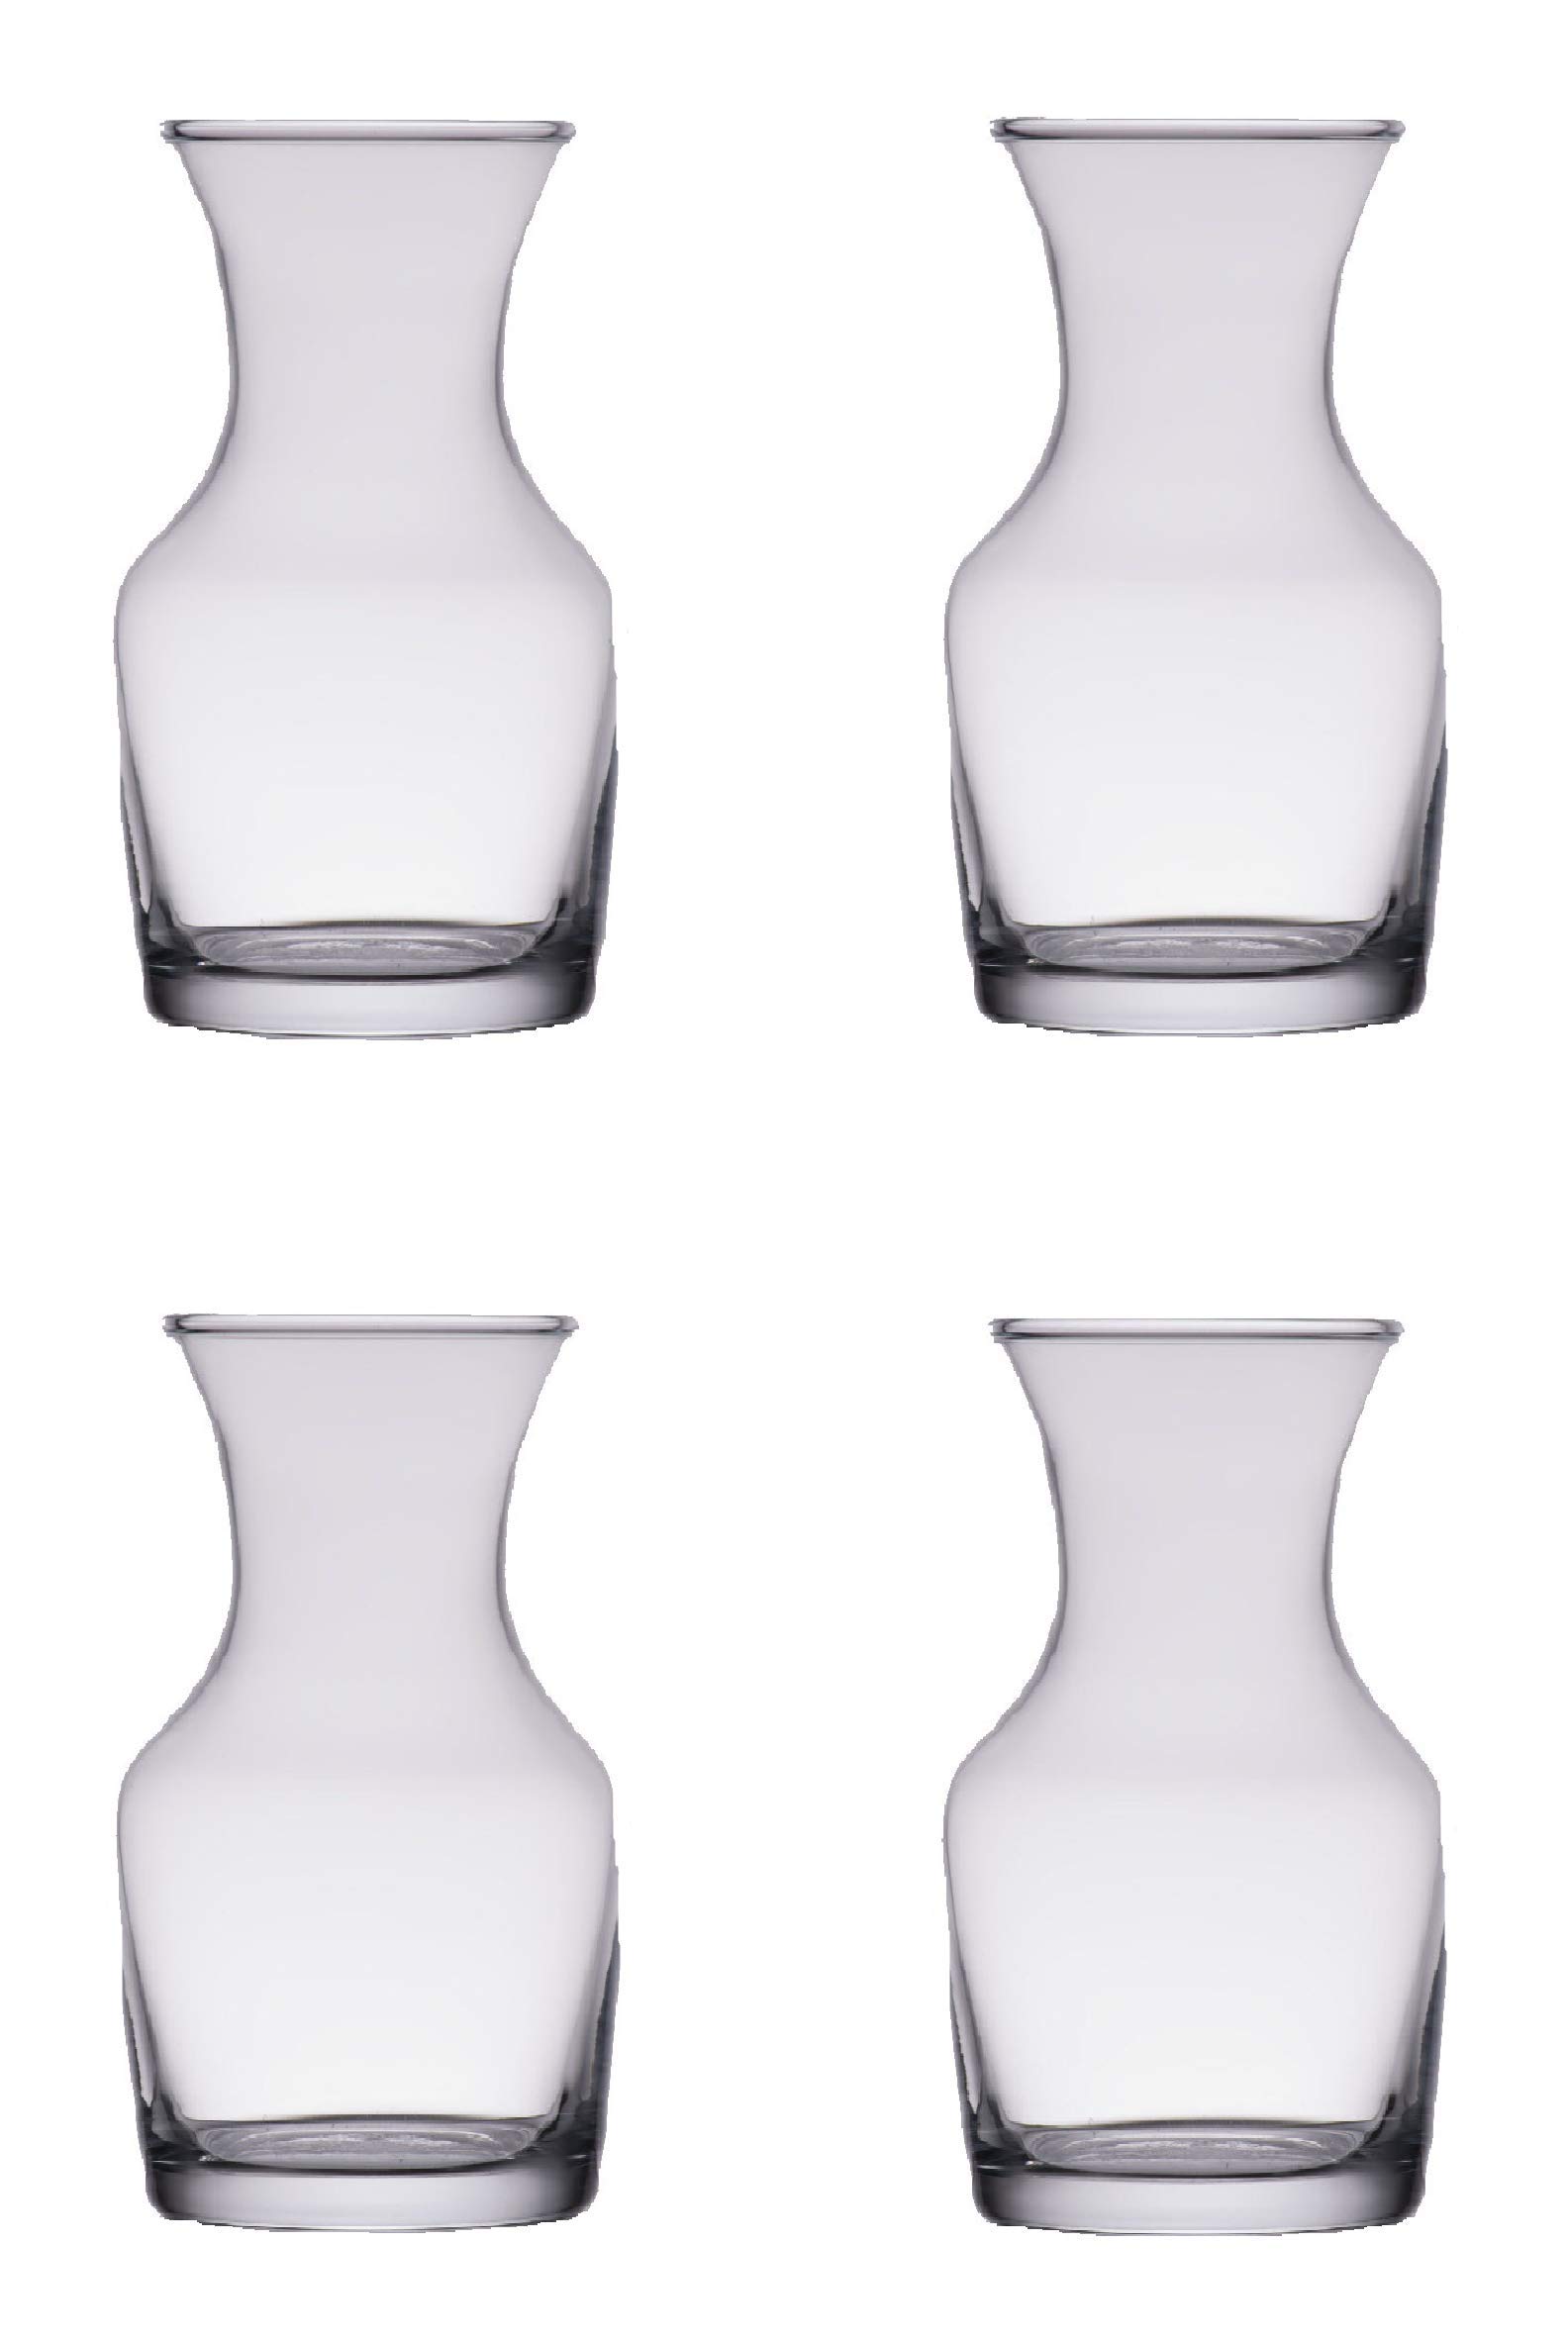 Single Serving Glass Wine Carafe 6.5 oz - Mini Decanters - Small Individual Carafes, set of 4 - w/coasters